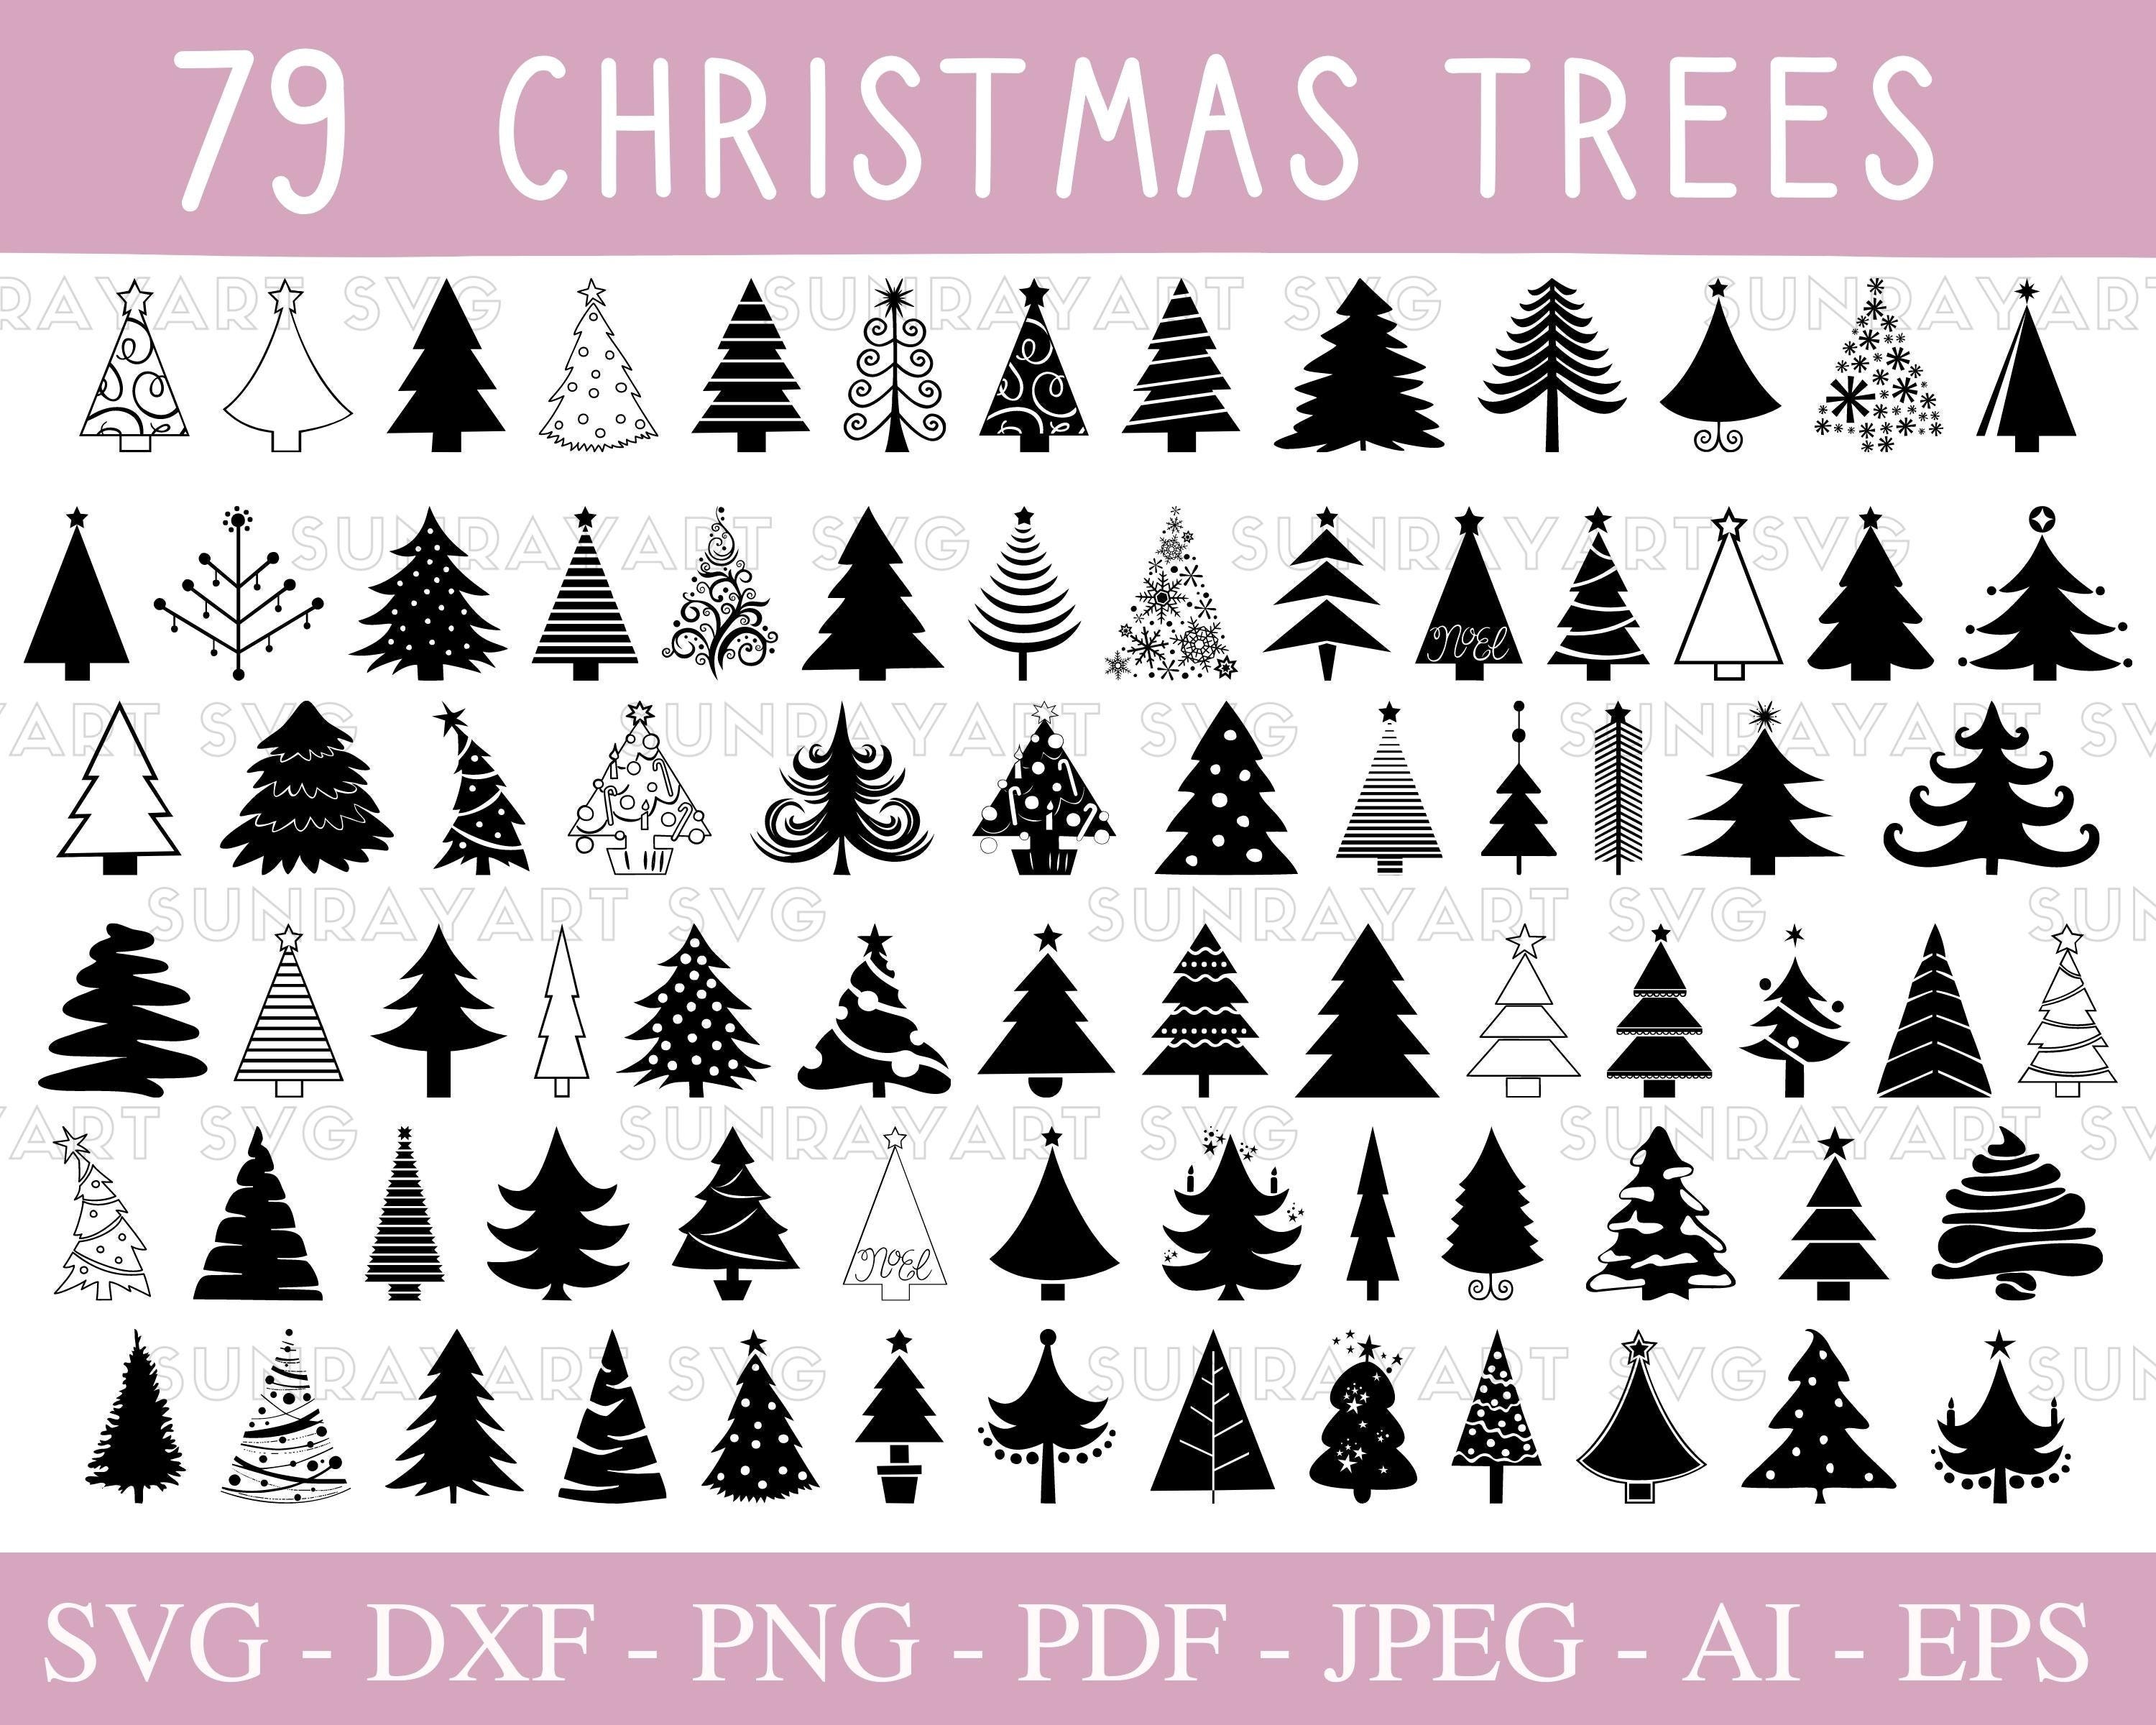 Christmas Trees SVG Files For Cricut, Christmas Tree Clipart Bundle PNG, Silhouette, DXF Cut File, Holiday Party Clipart, Pdf.